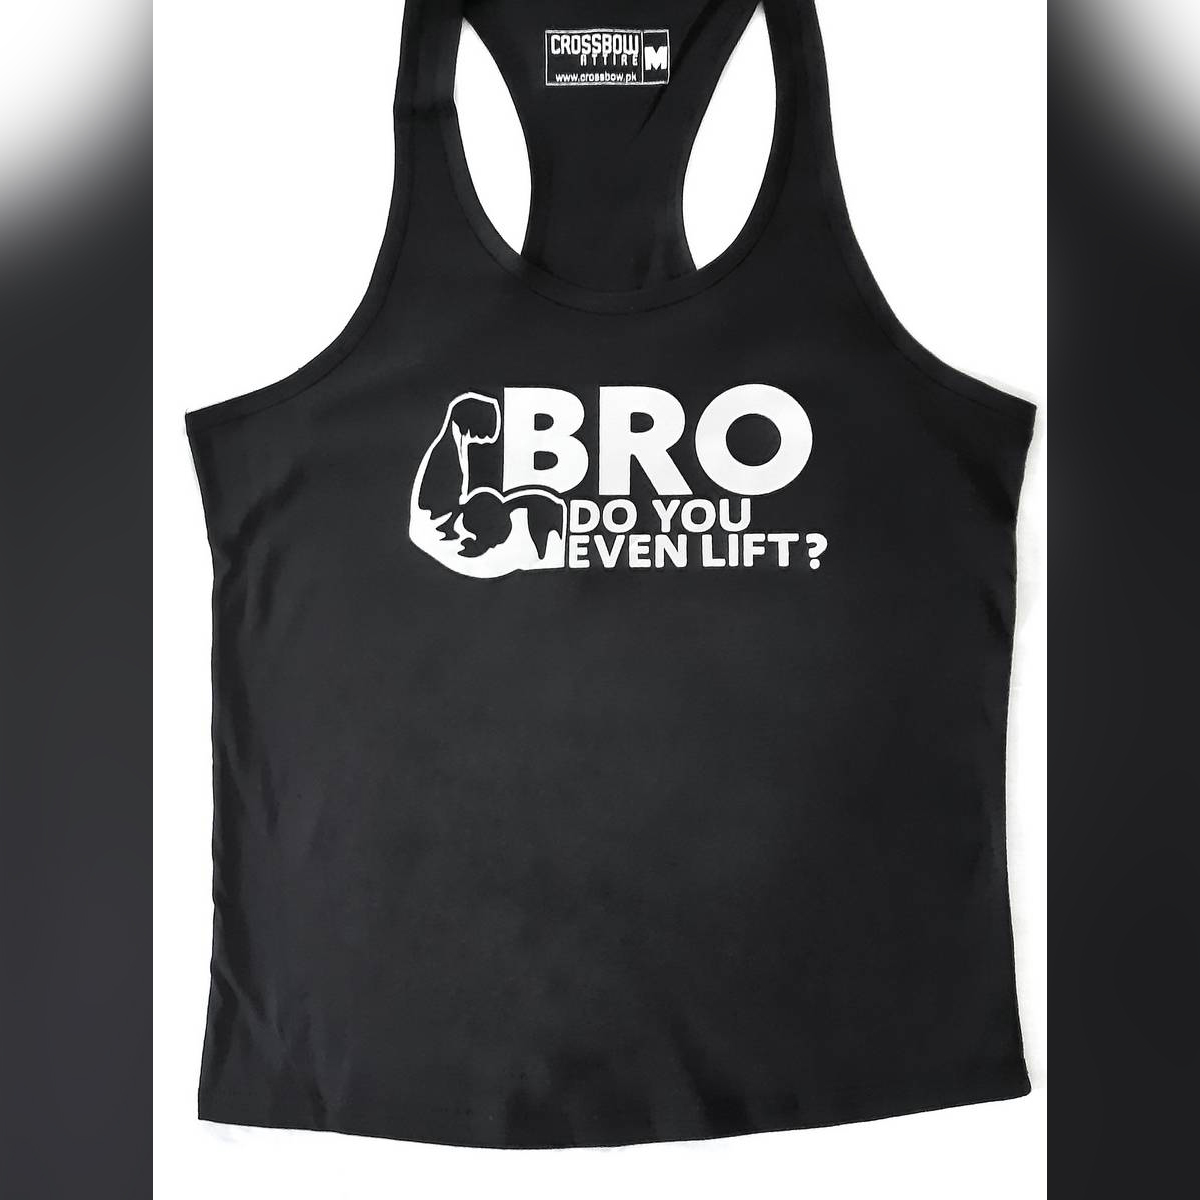 Crossbow Bro Do You Even Lift Summer Cotton Tanktop For Gym, Fitness And Training For Men